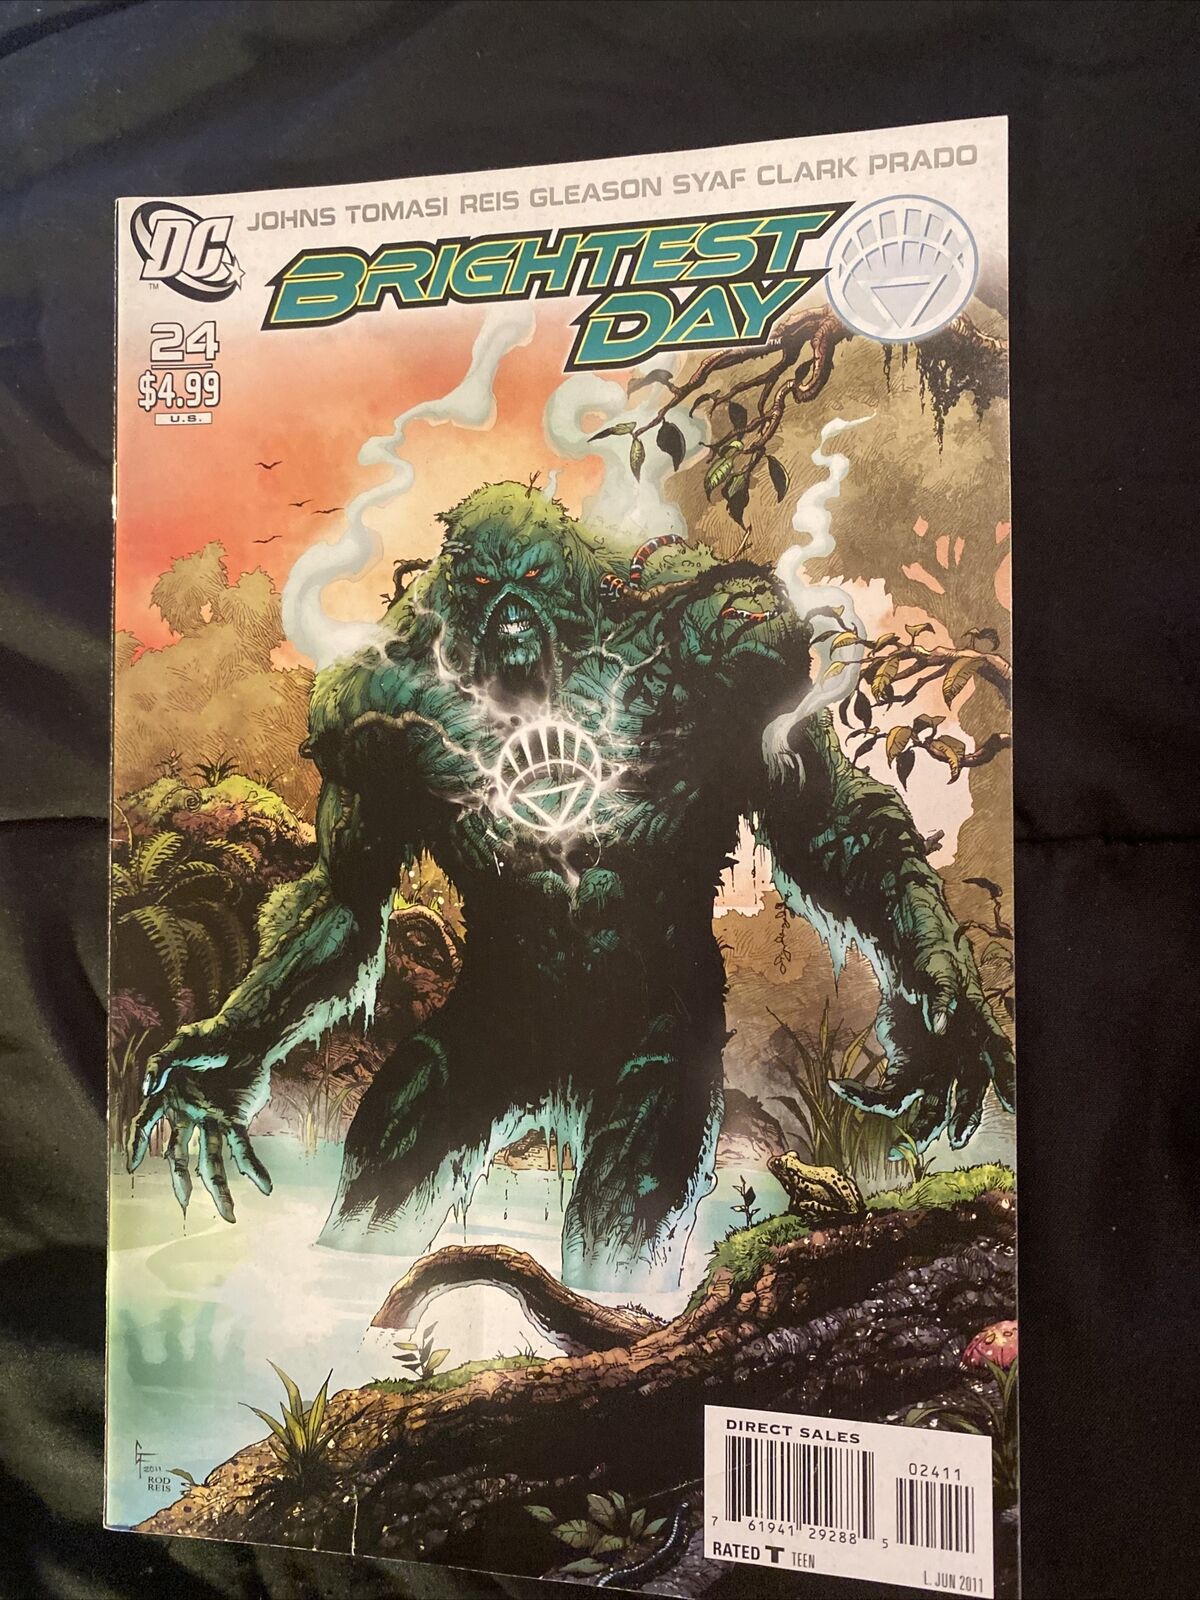 Brightest Day #24 (DC, 2011) White Lantern Swamp Thing Cover VF+